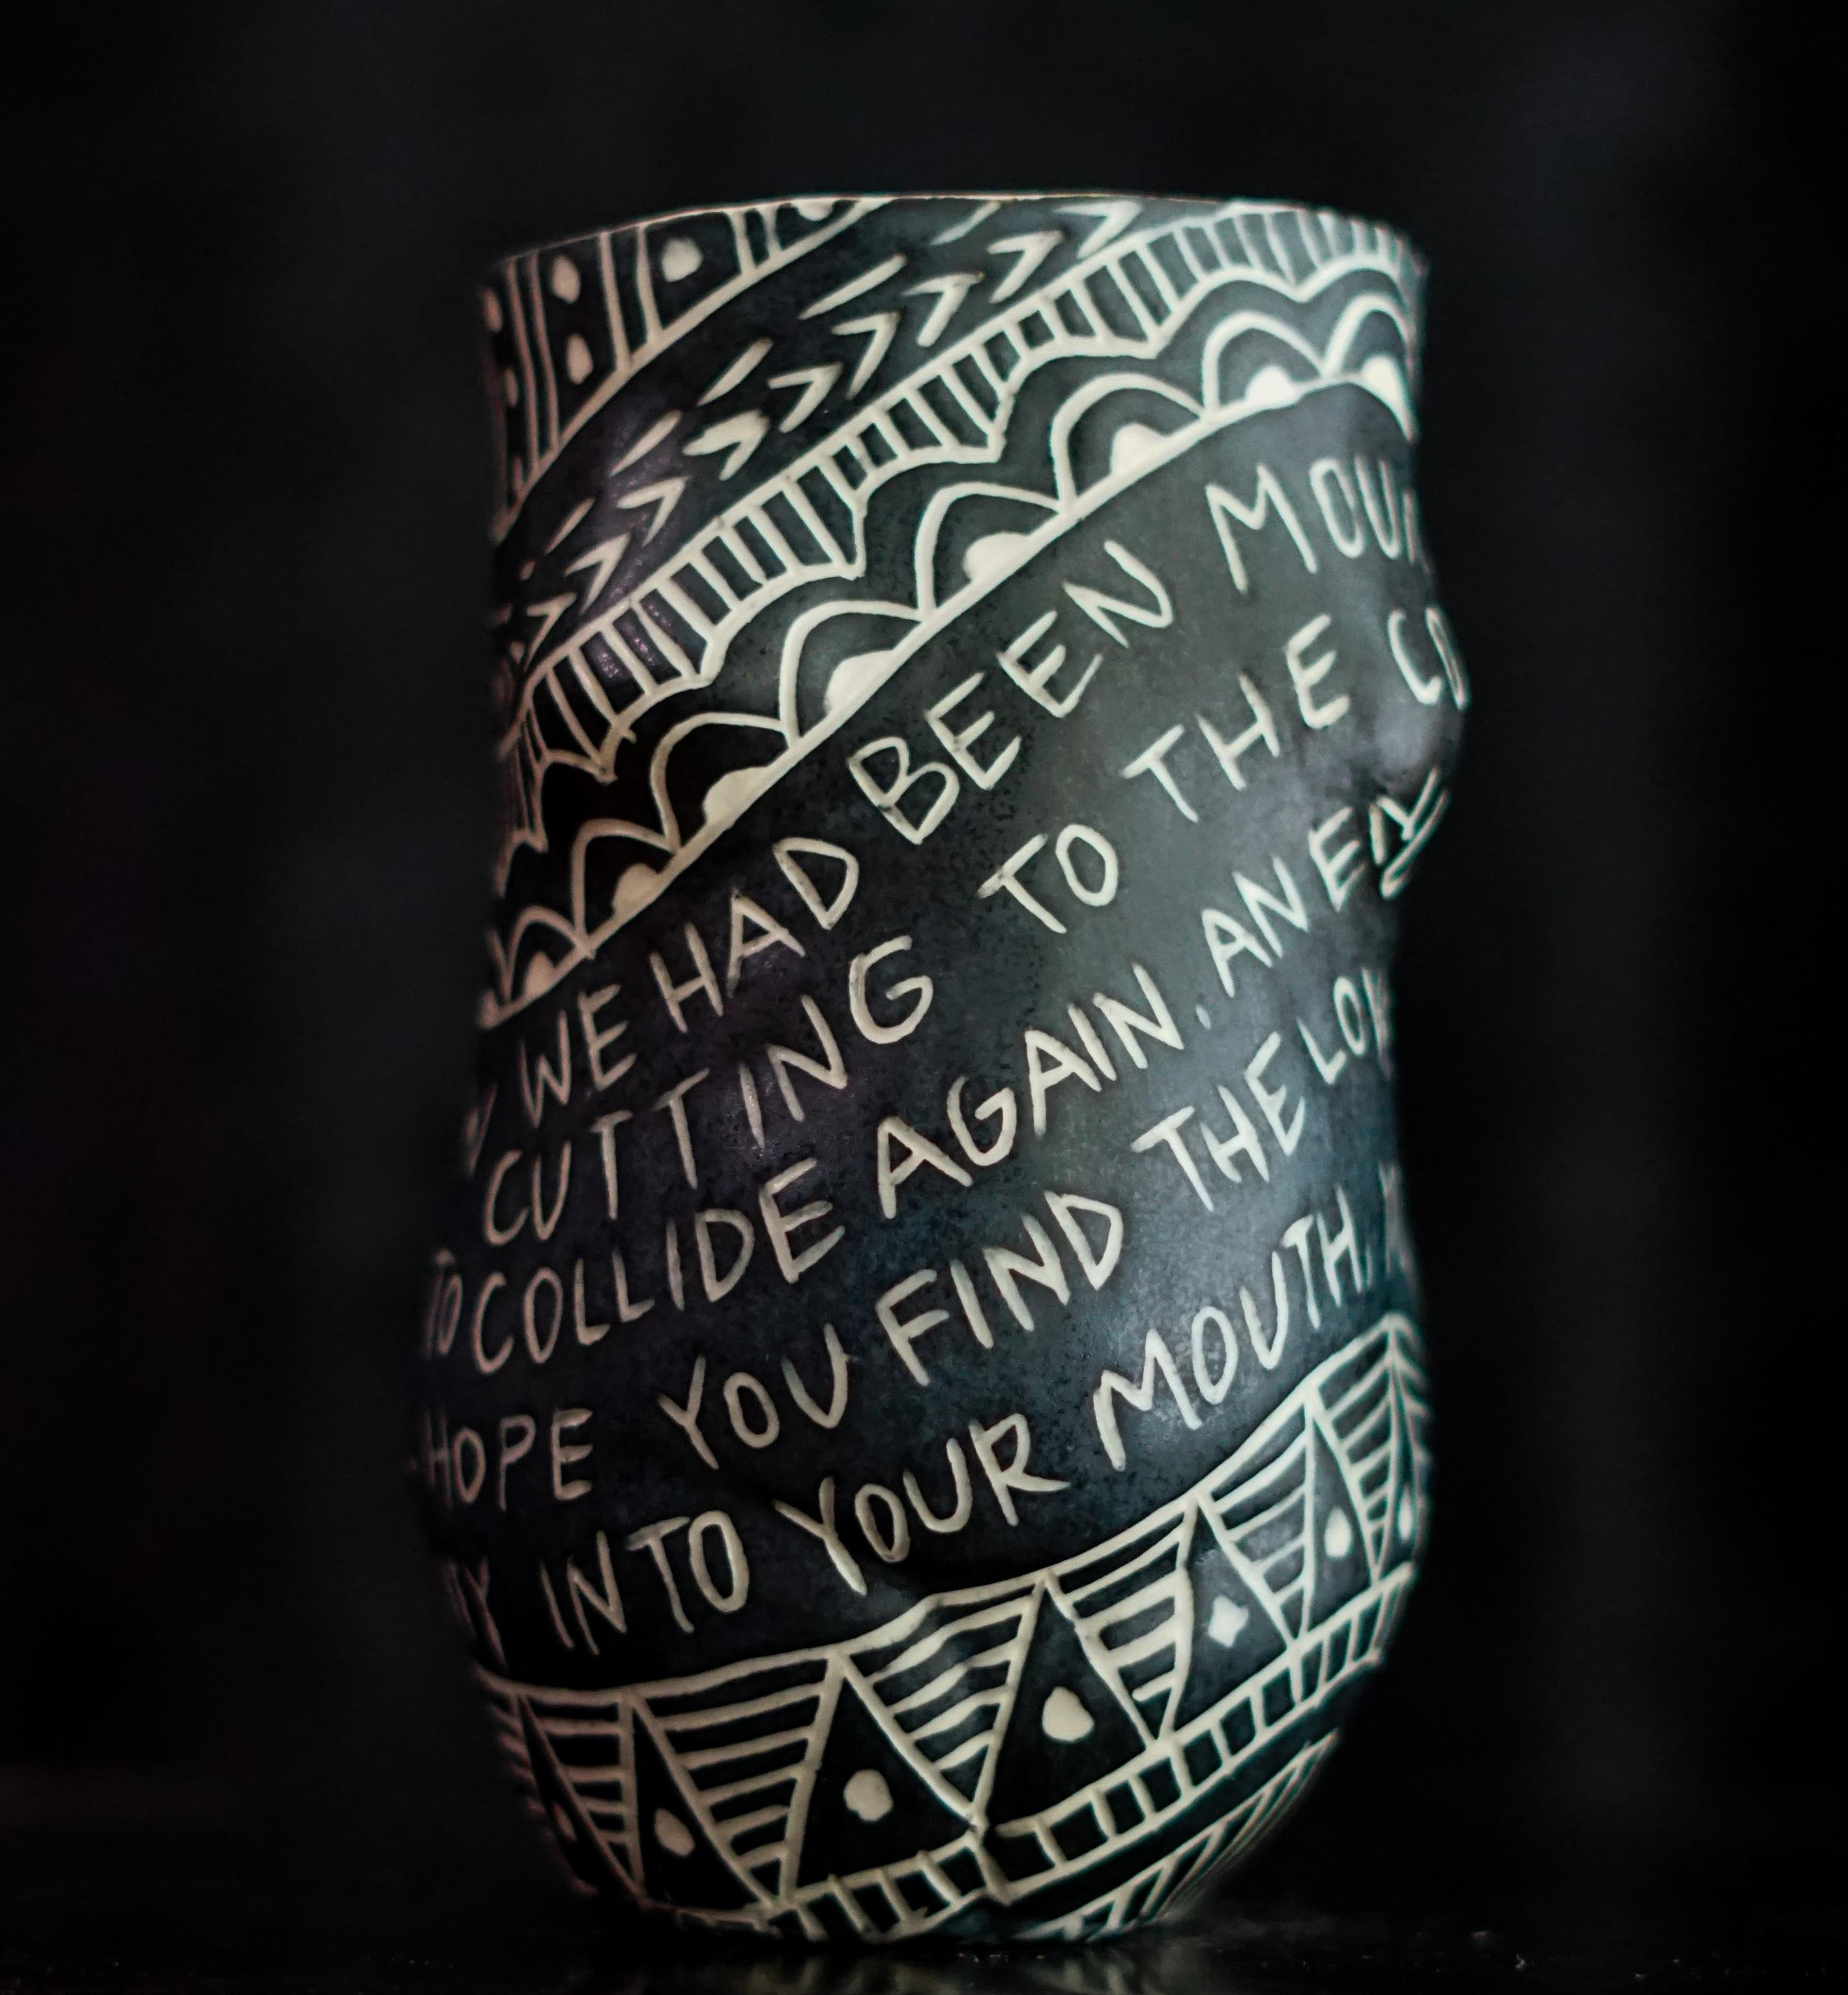 Alex Hodge Abstract Sculpture - “We had been Mountains...” Porcelain cup with sgraffito detailing